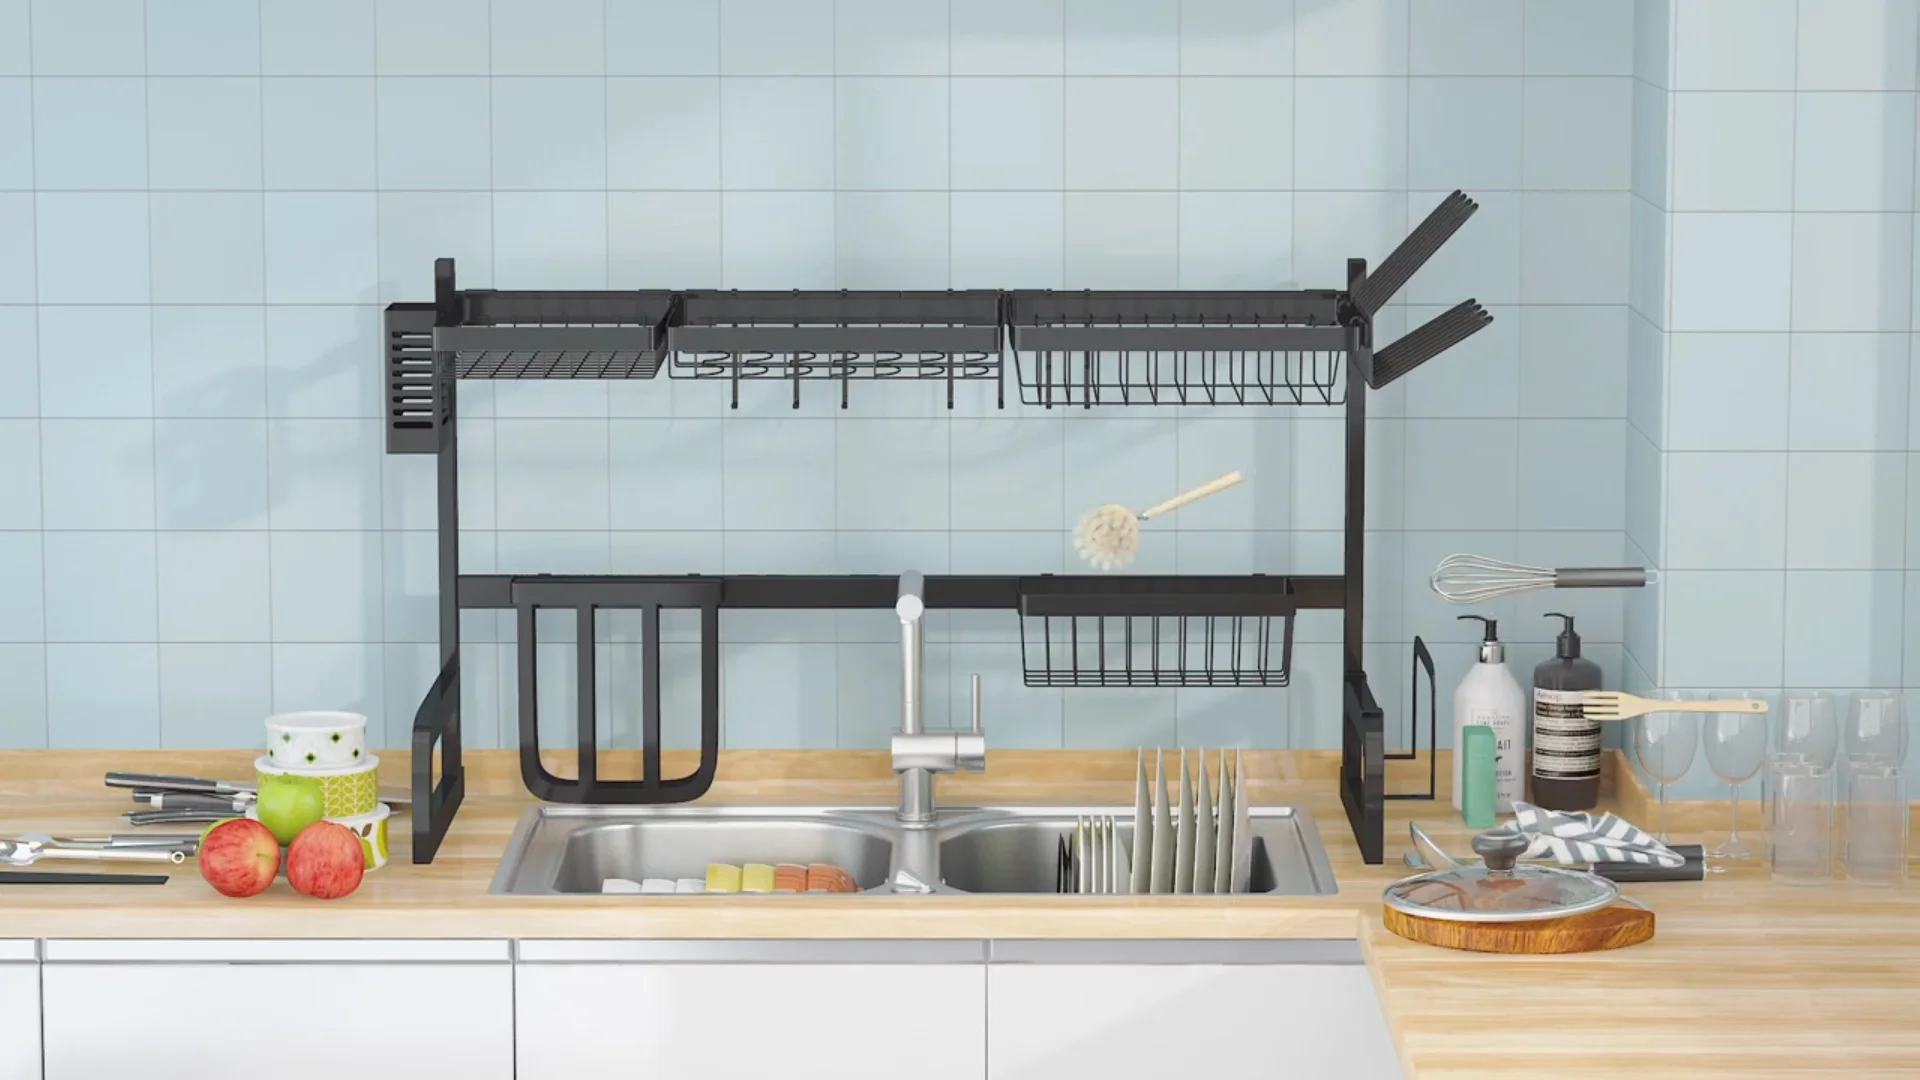 Oumilen Adjustable Stainless Steel Over Sink Dish Drying Rack - Black